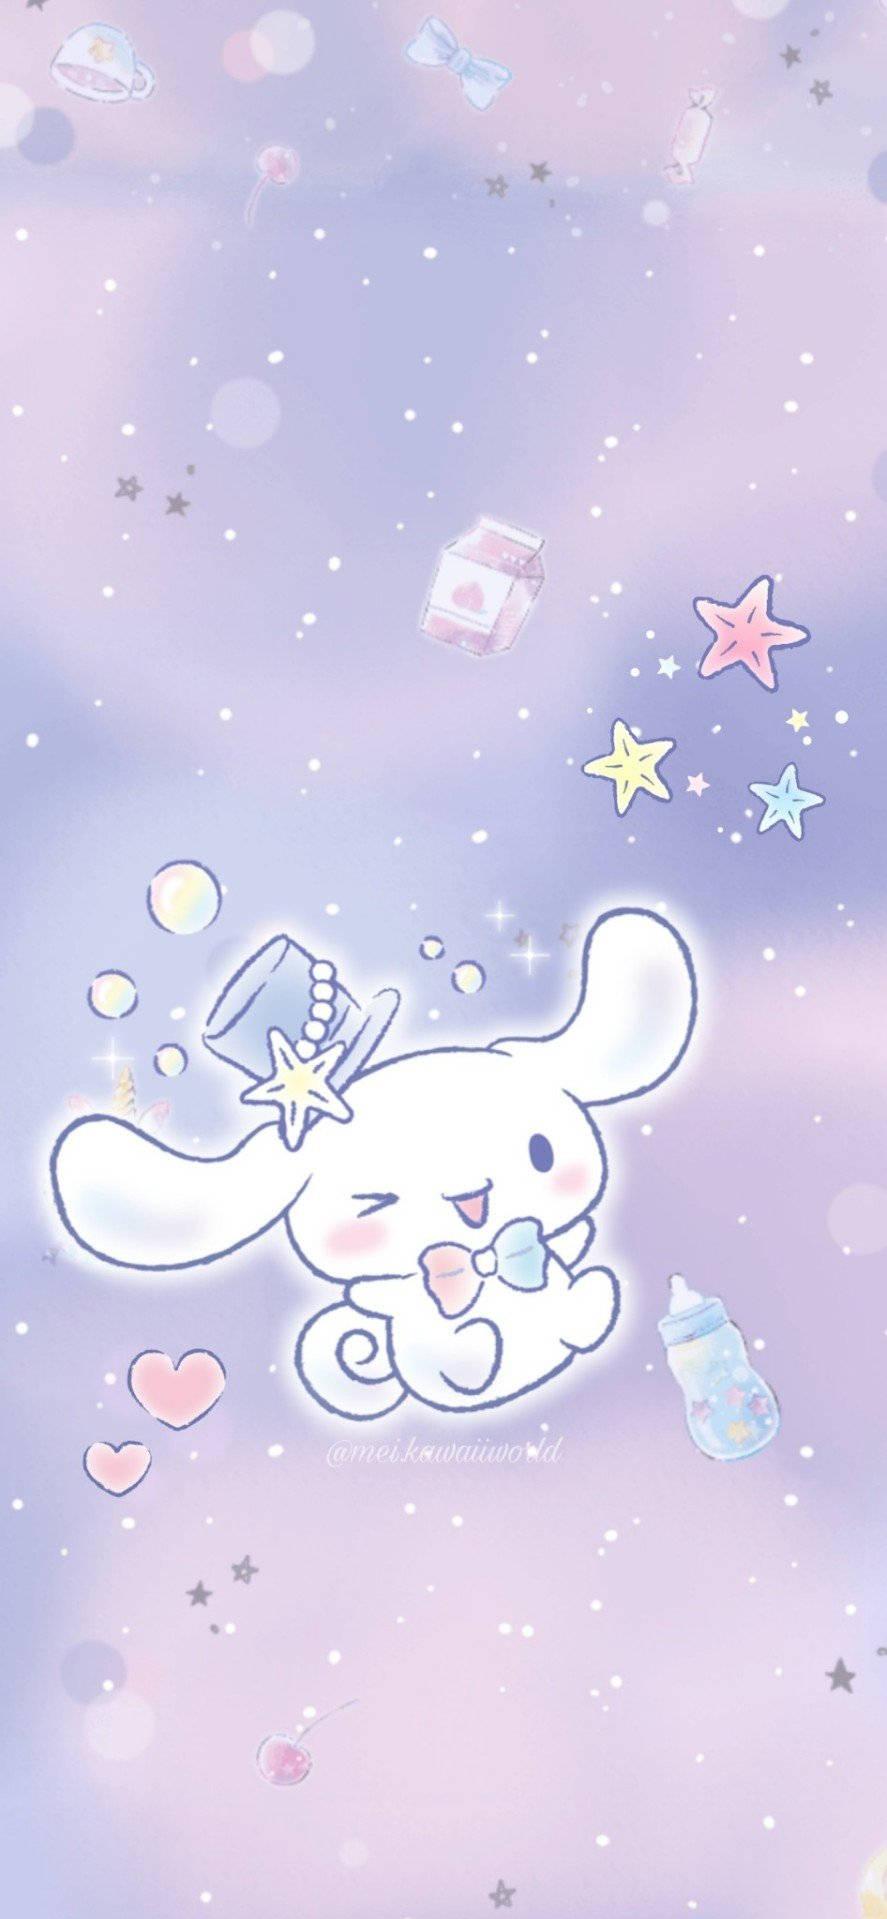 All The Best Moments With Cute Sanrio Wallpaper